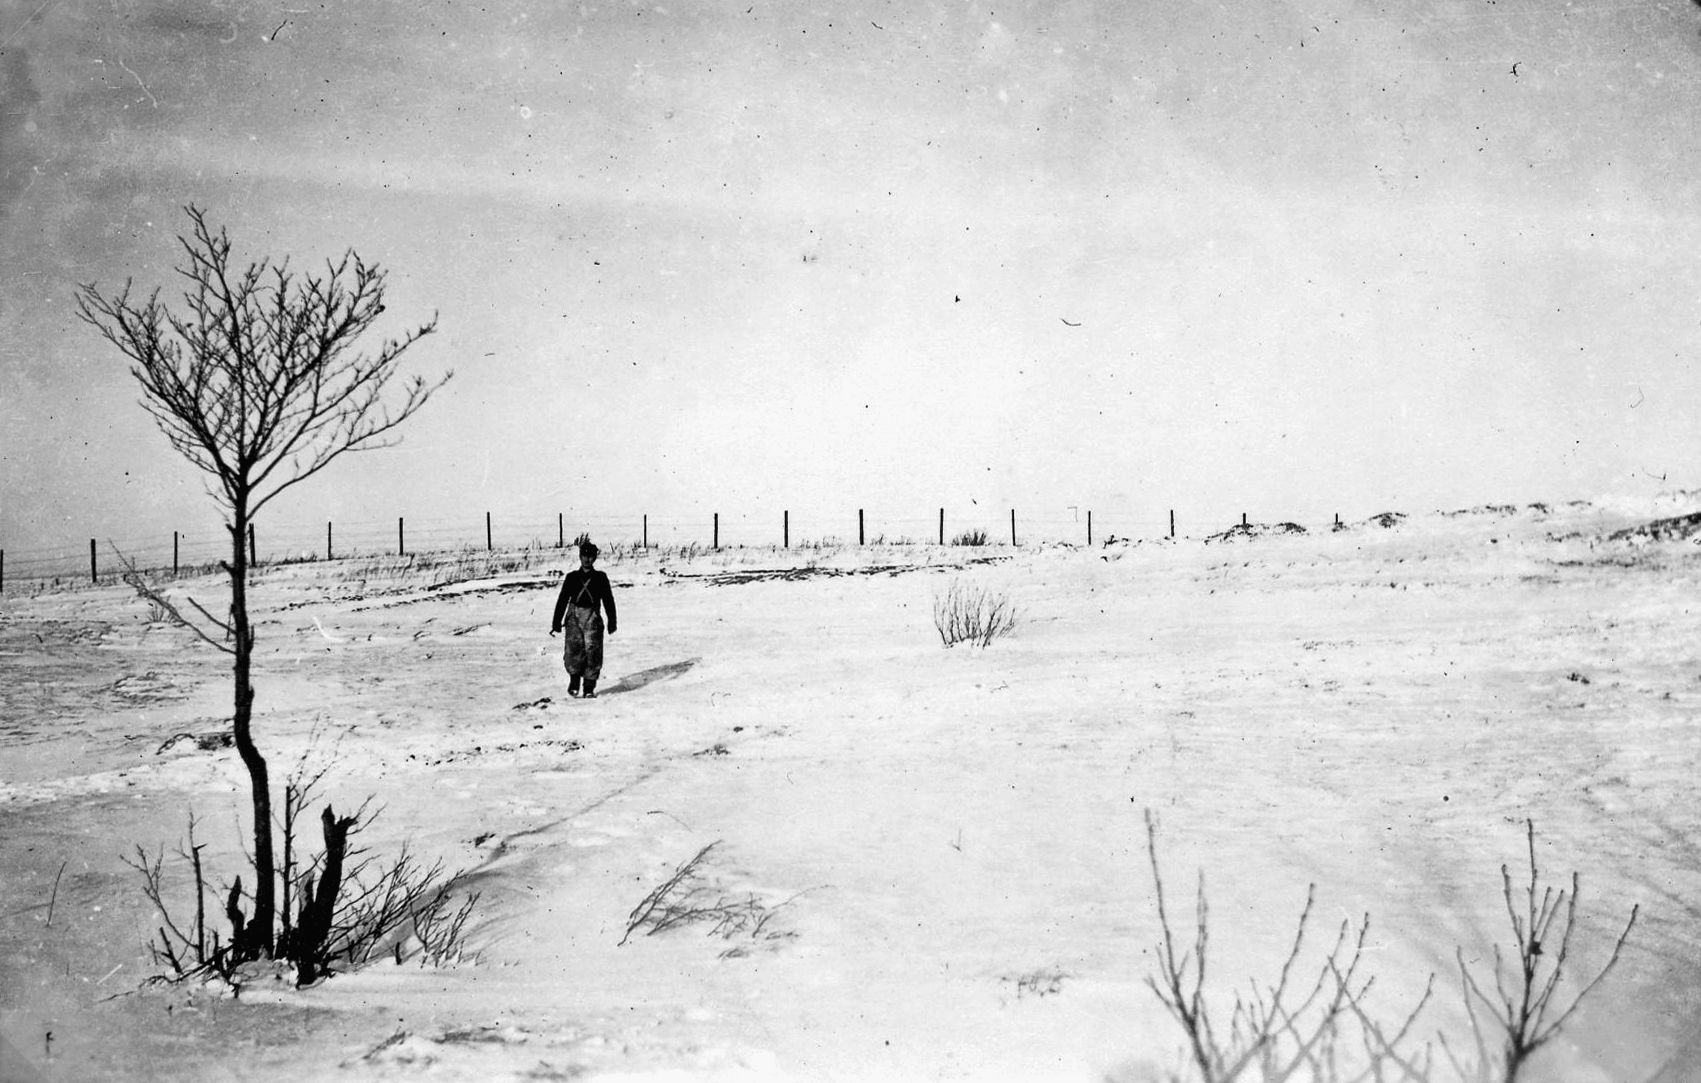 Hans-Joachim Buchmüller, a comrade of Joachim Benz, scans the horizon near Vitebsk during the winter of 1943-44. The bitter cold took a fearful toll among the German troops and caused mechanized equipment to fail. 